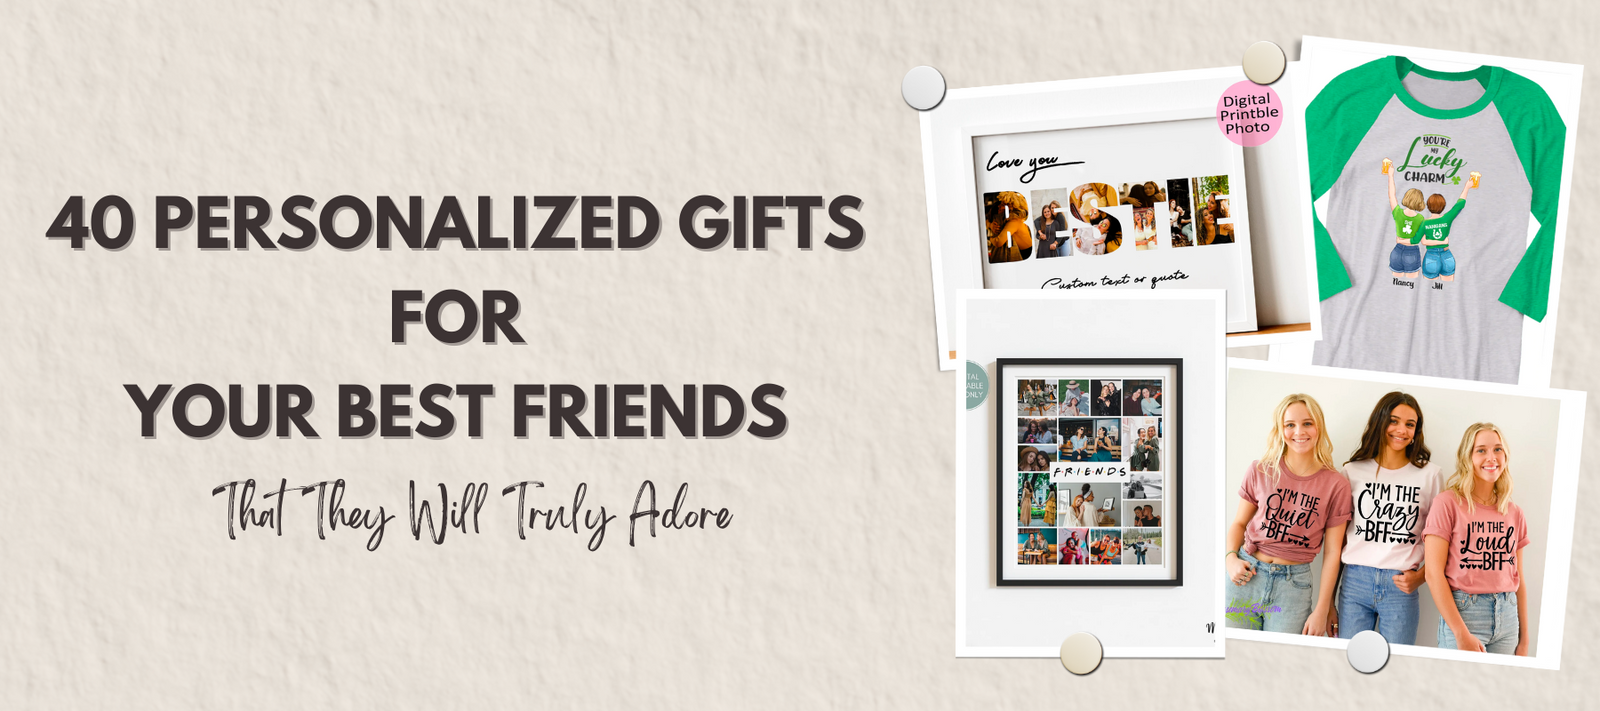  Best Friend Birthday Gifts for Women Teen Girls, Christmas Gifts  for Best Friend Picture Frame, Long Distance Friendship Gifts for BFF  Besties Sister Photo Holder Hanging Photo Display Collage Frame 